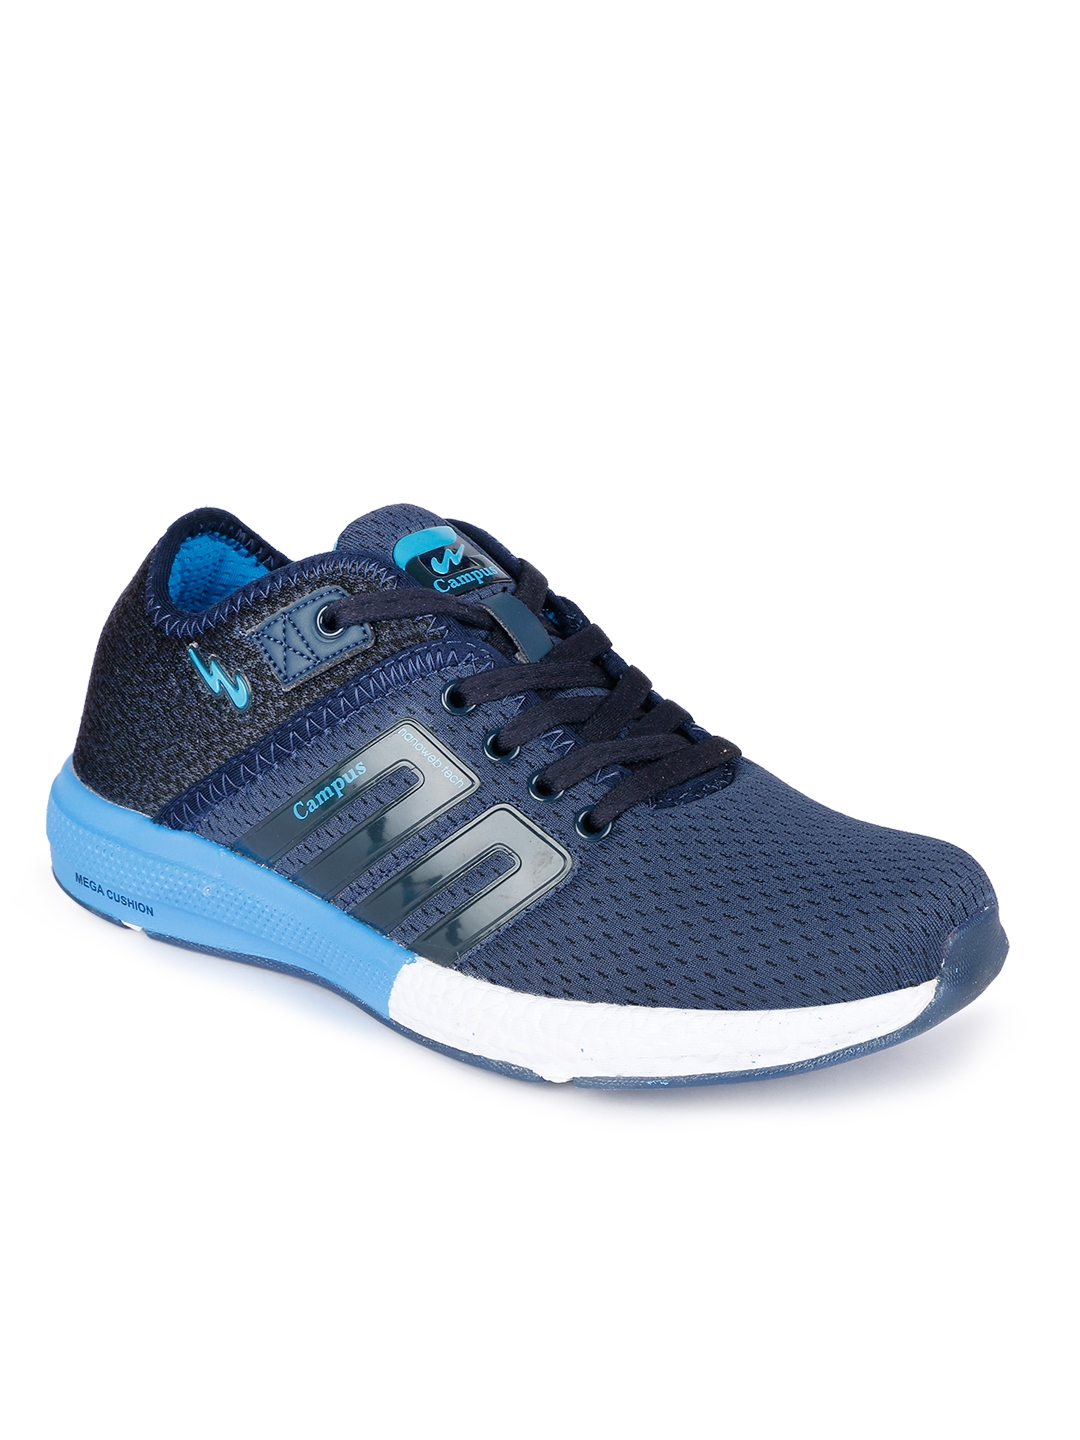 campus navy blue running shoes